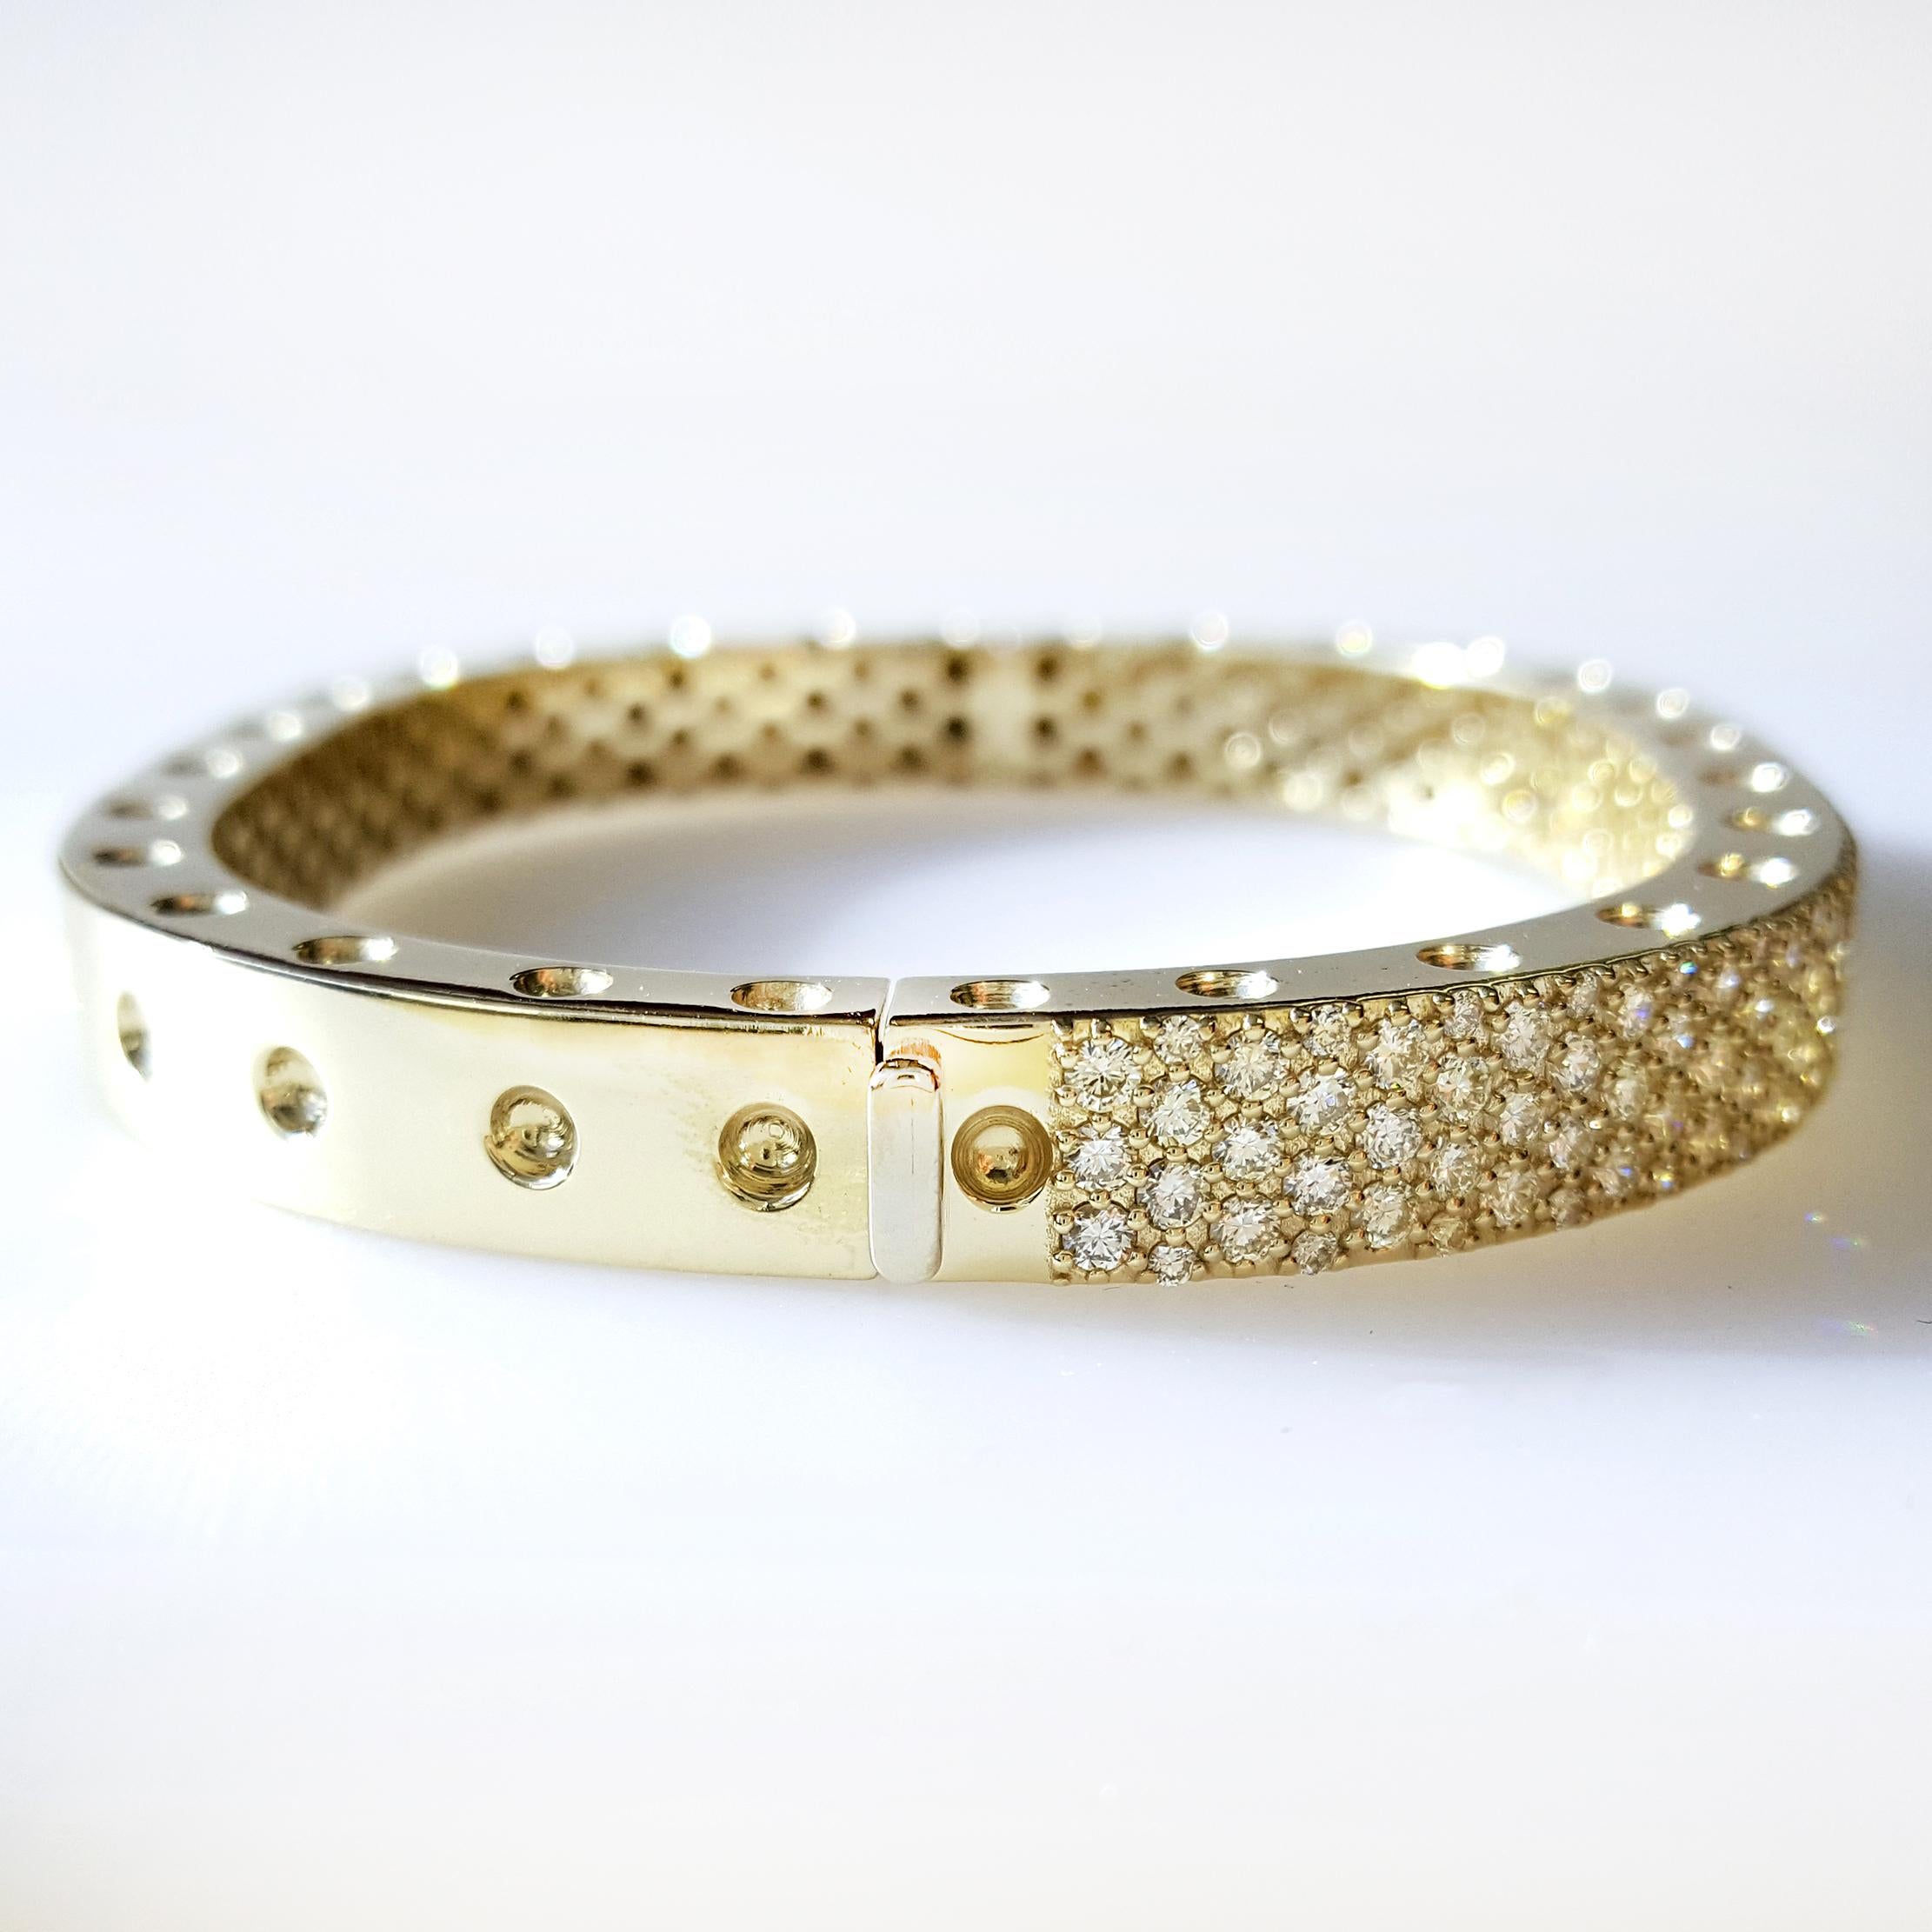 This stunning two section 18 karat Yellow gold bangle style bracelet is accented with 171 carefully matched white round brilliant diamonds weighing approximately 4.16 carat total. Inspired by art and fashion, Novel Collection is presenting its